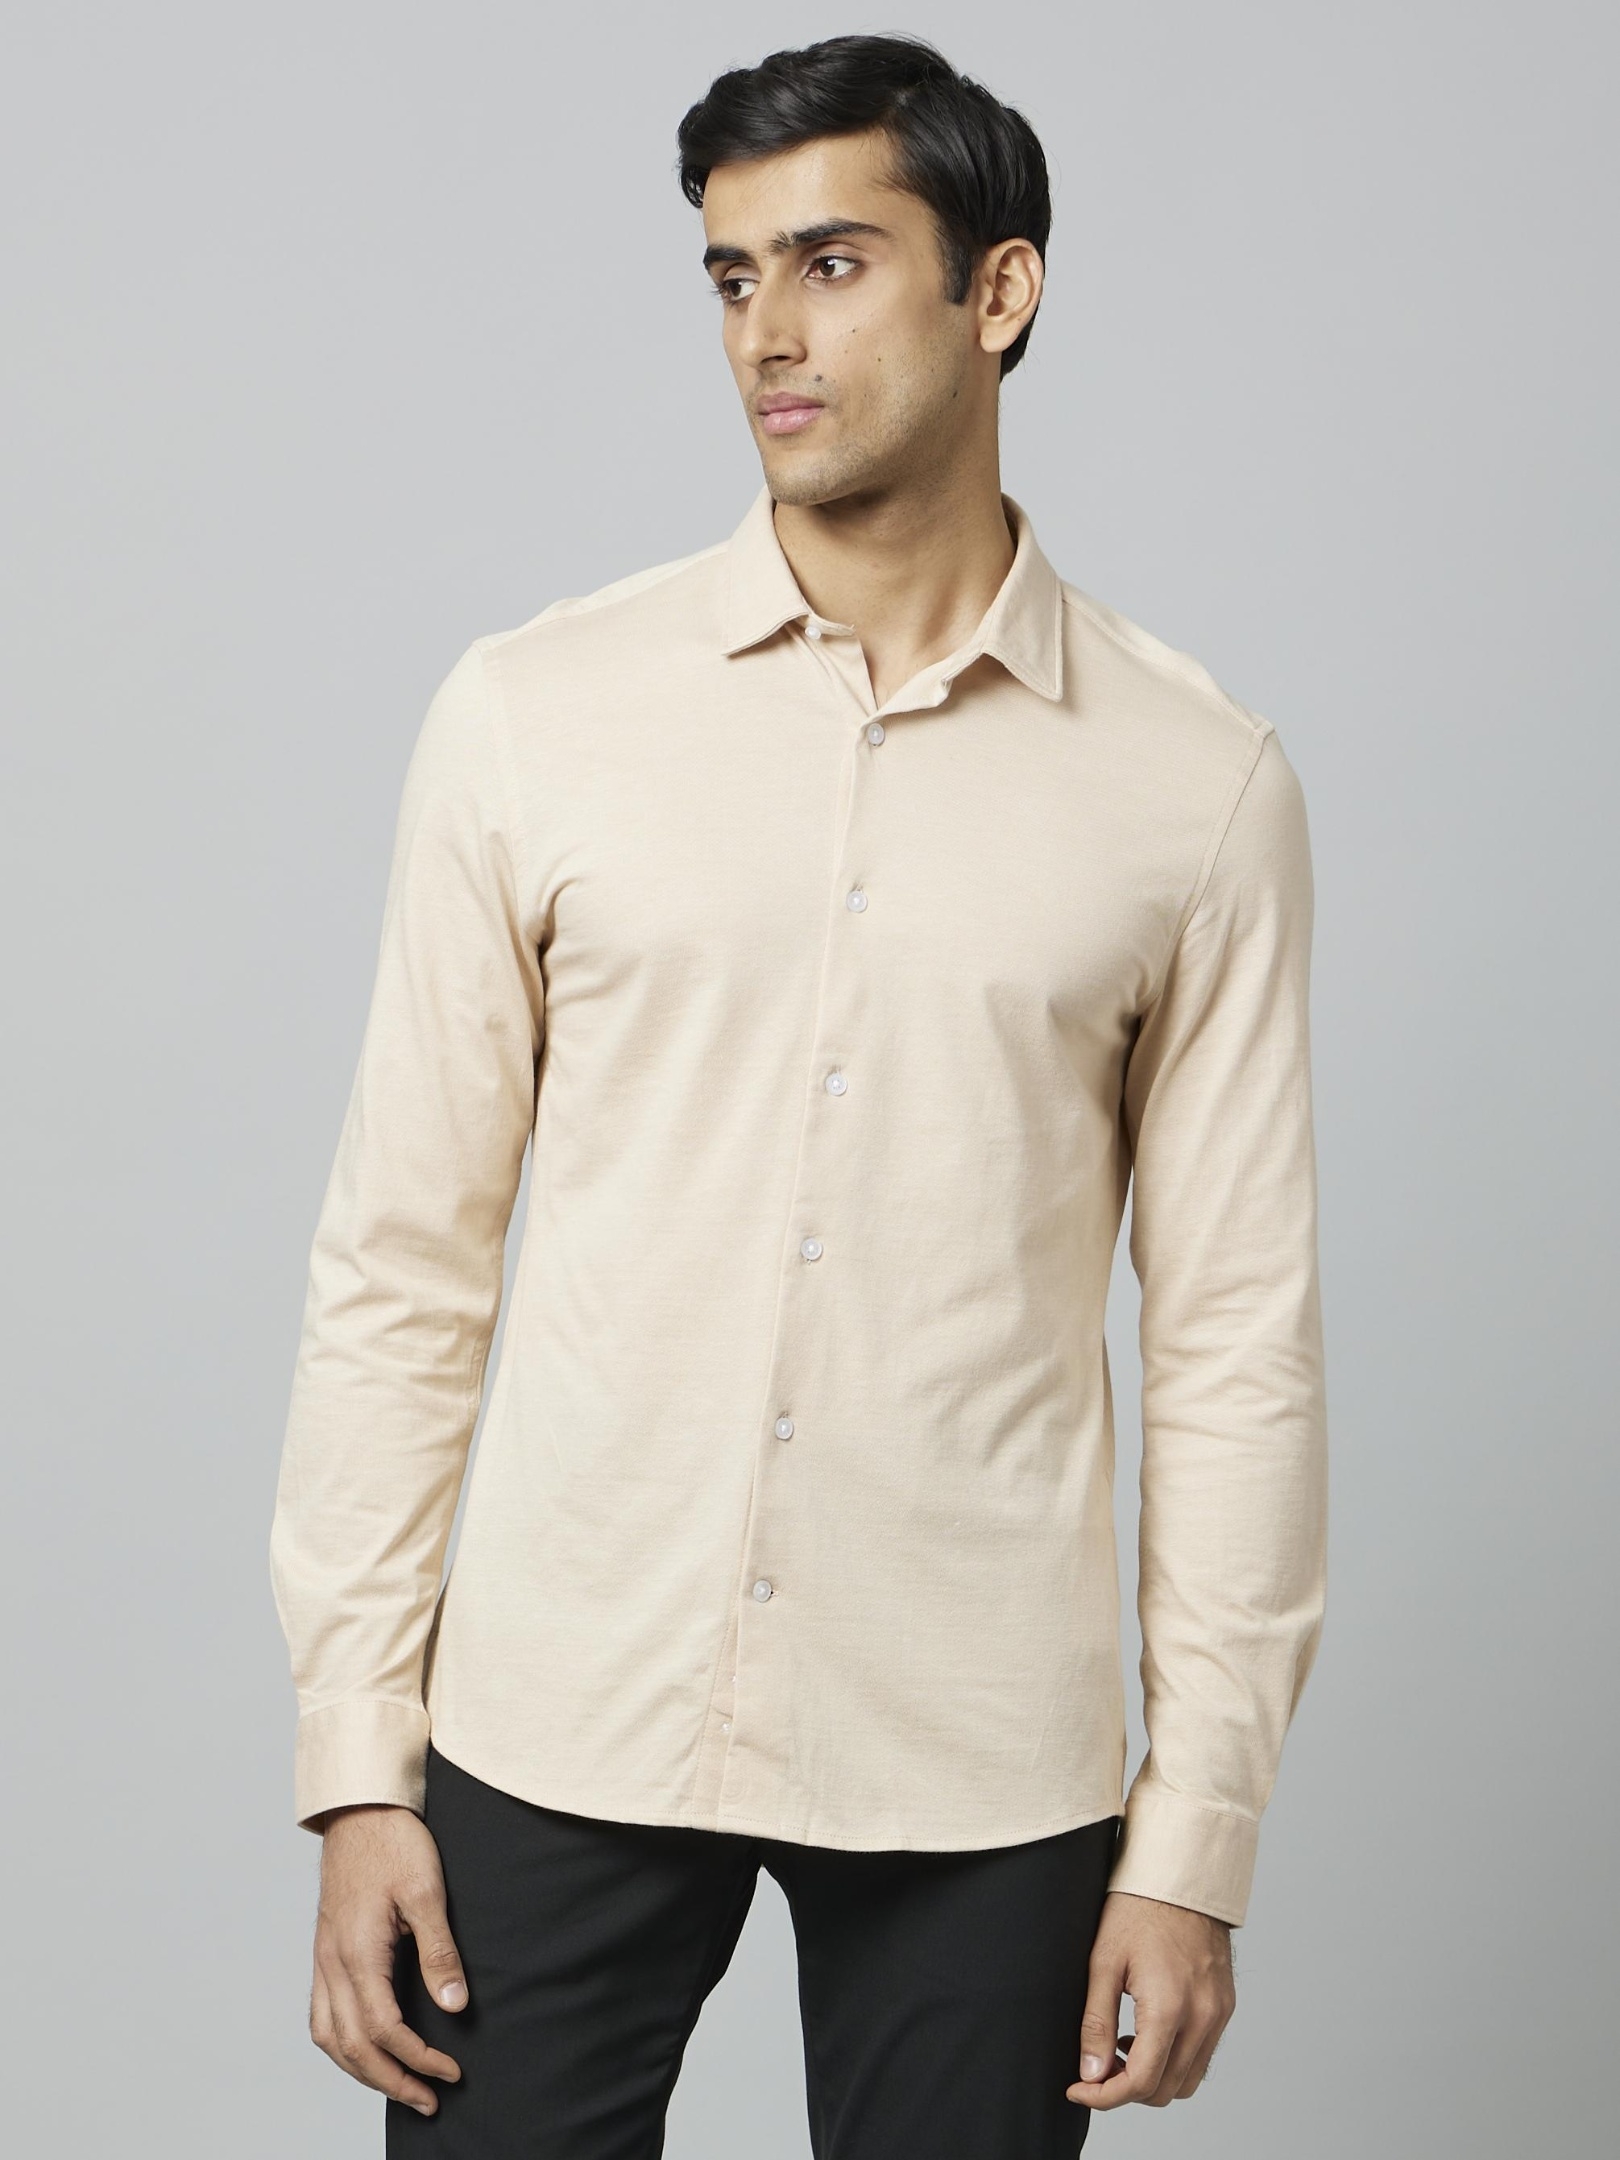 Celio Knit Shirt Solid Beige Long Sleeves Shirt